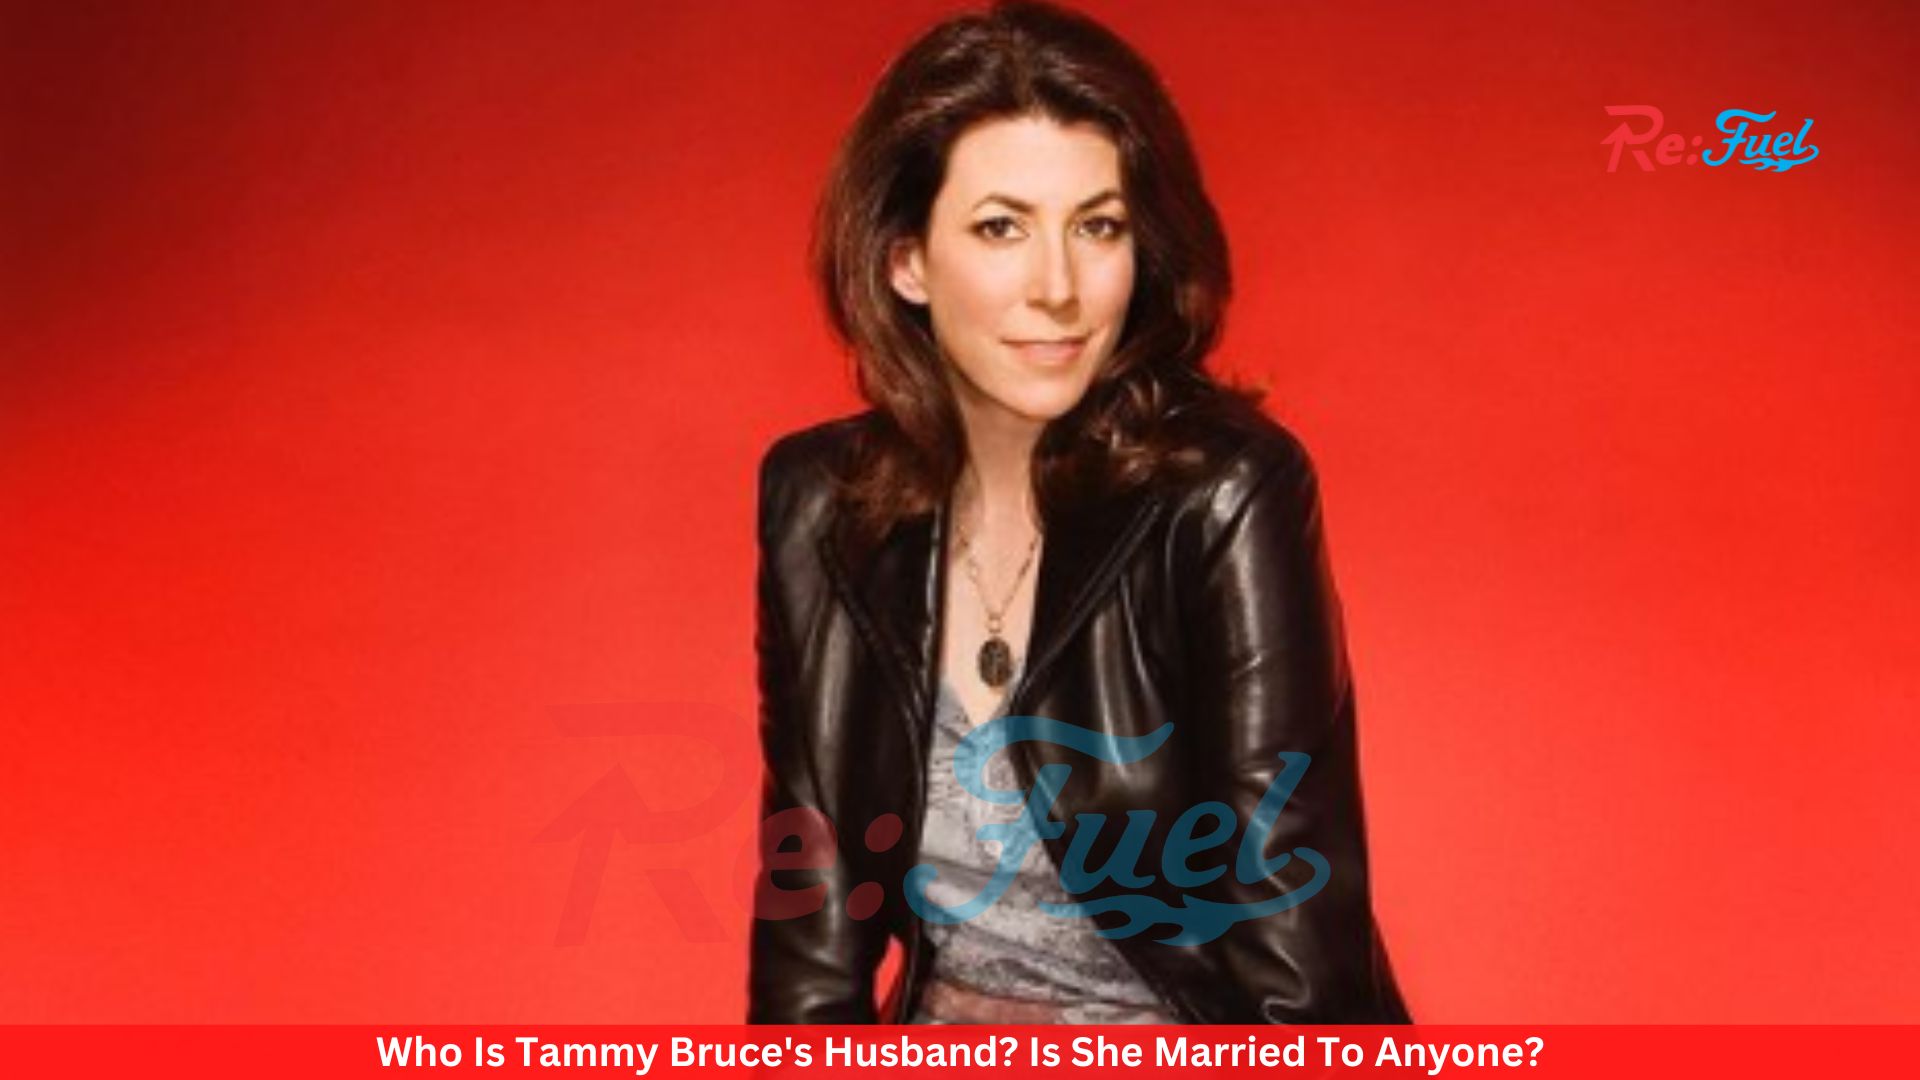 Who Is Tammy Bruce's Husband? Is She Married To Anyone?